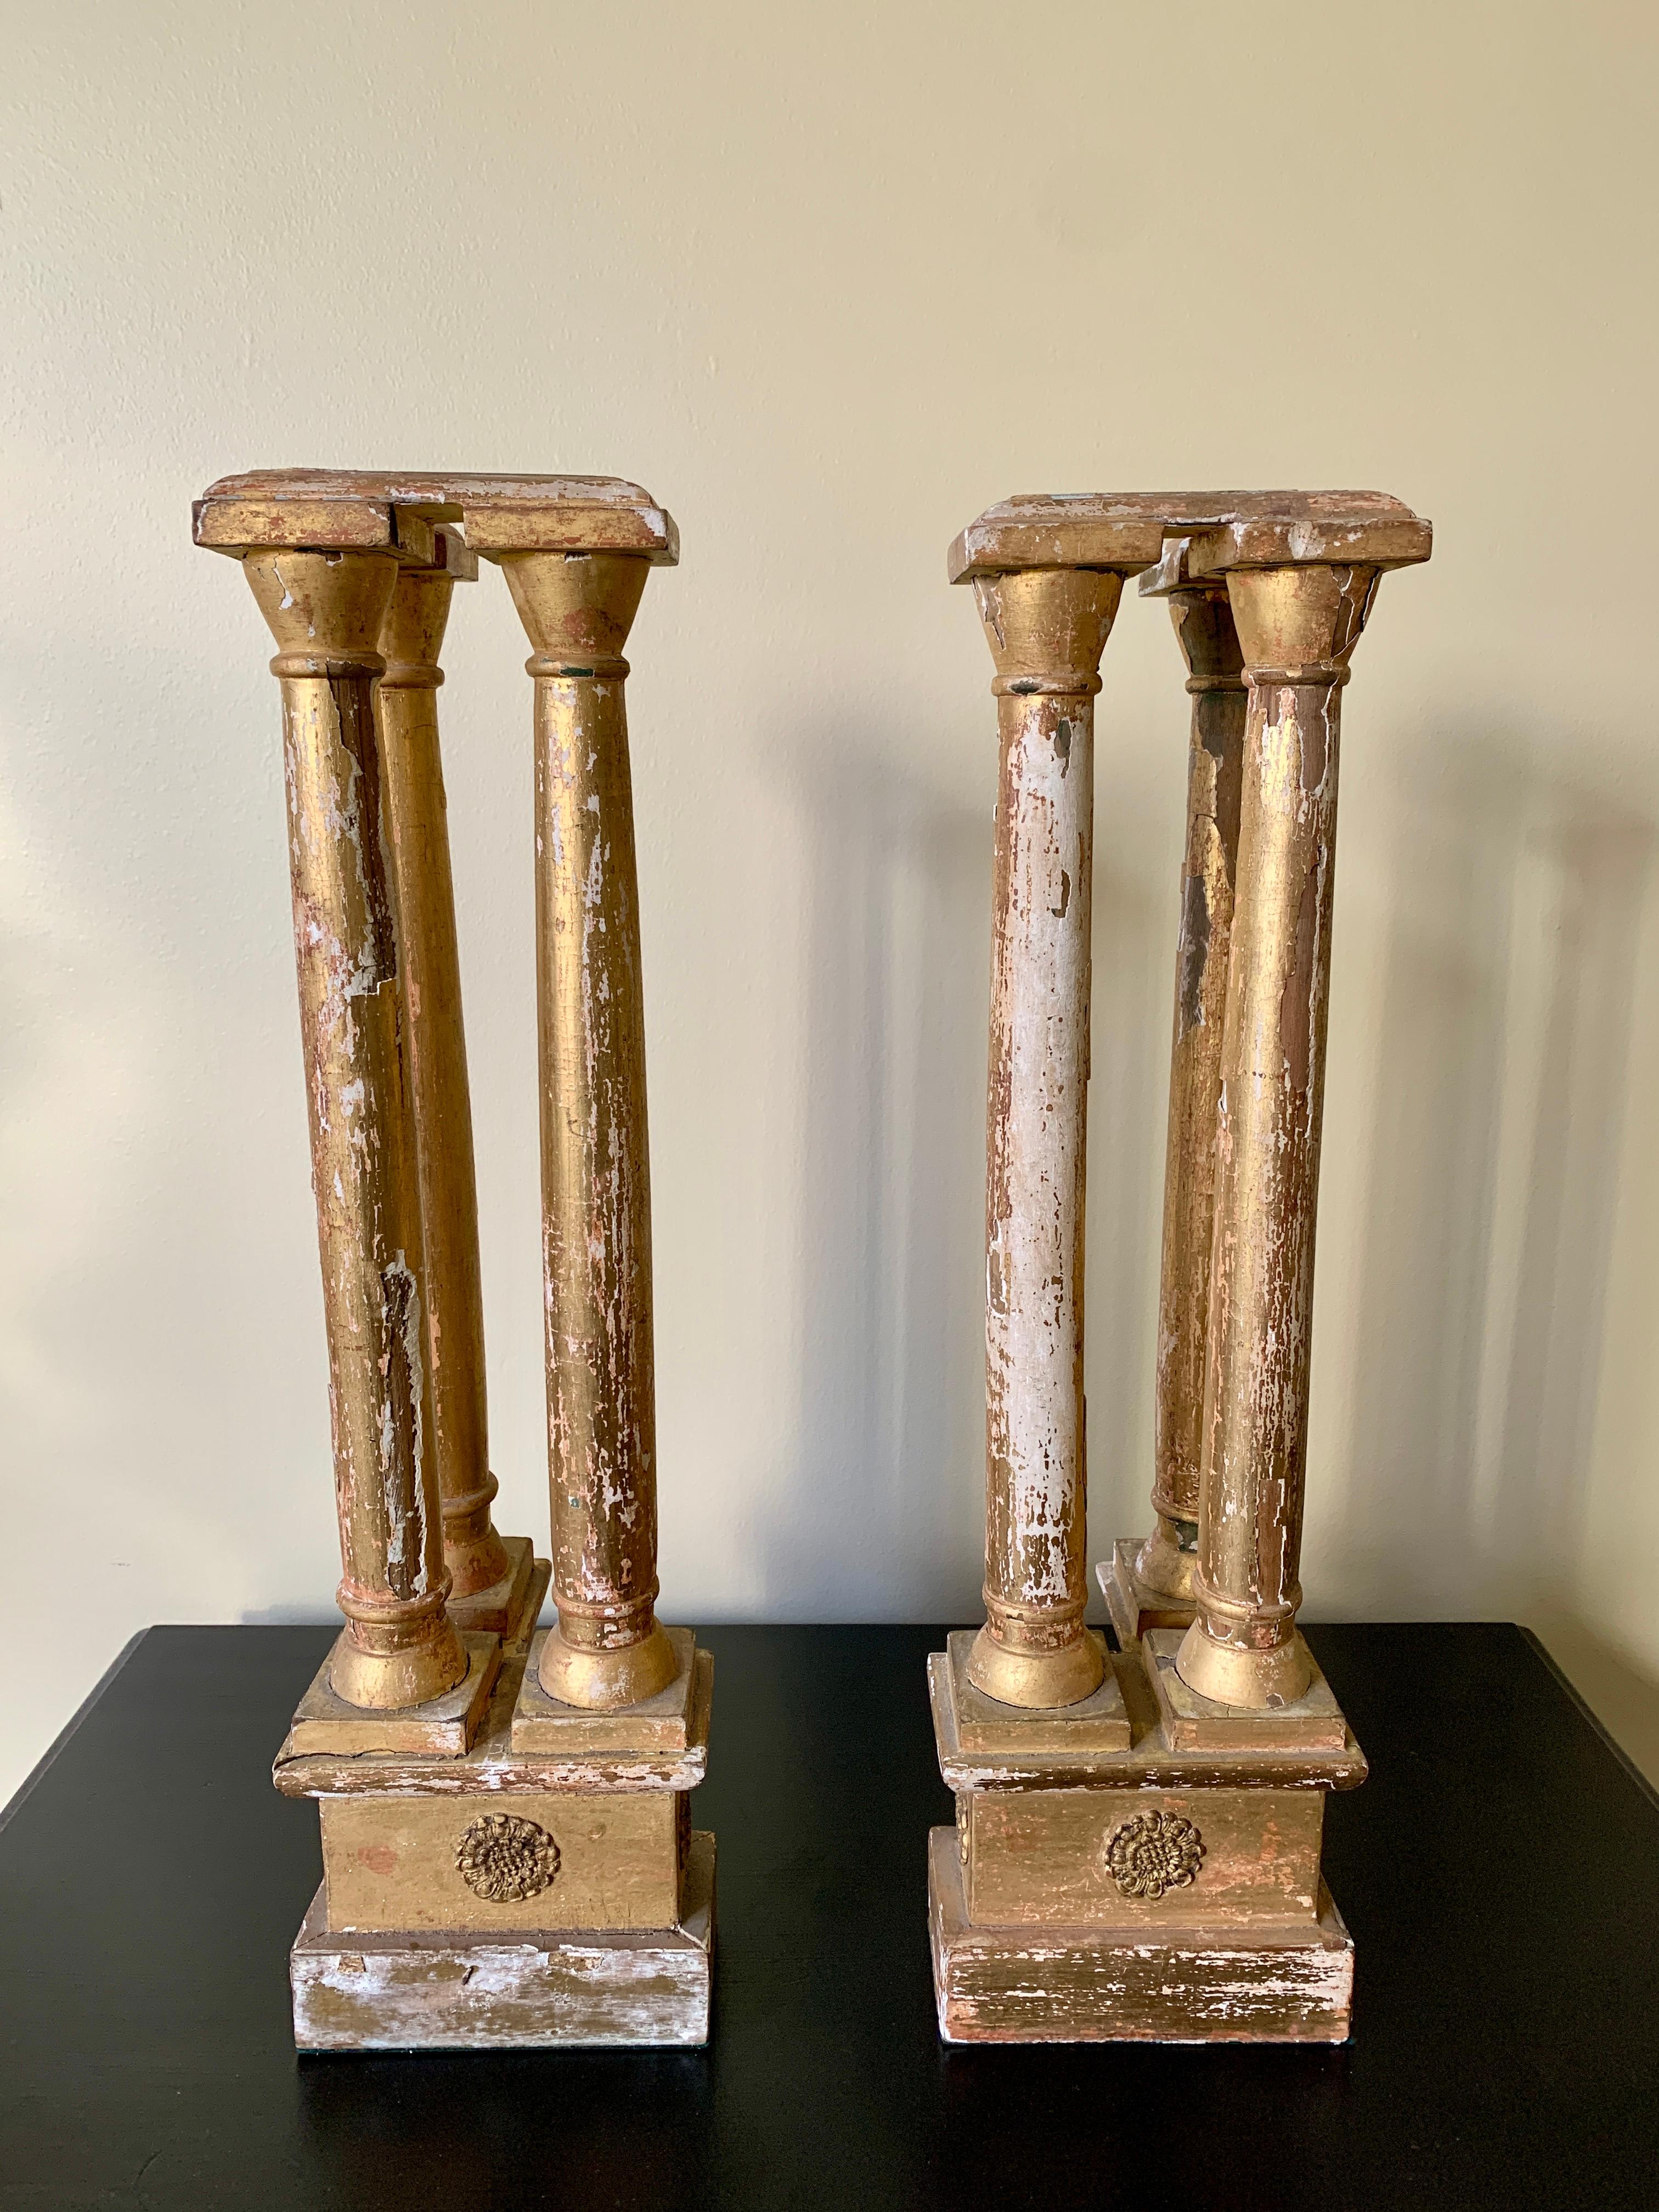 Antique Neoclassical Grand Tour Giltwood Architectural Columns, a Pair For Sale 3